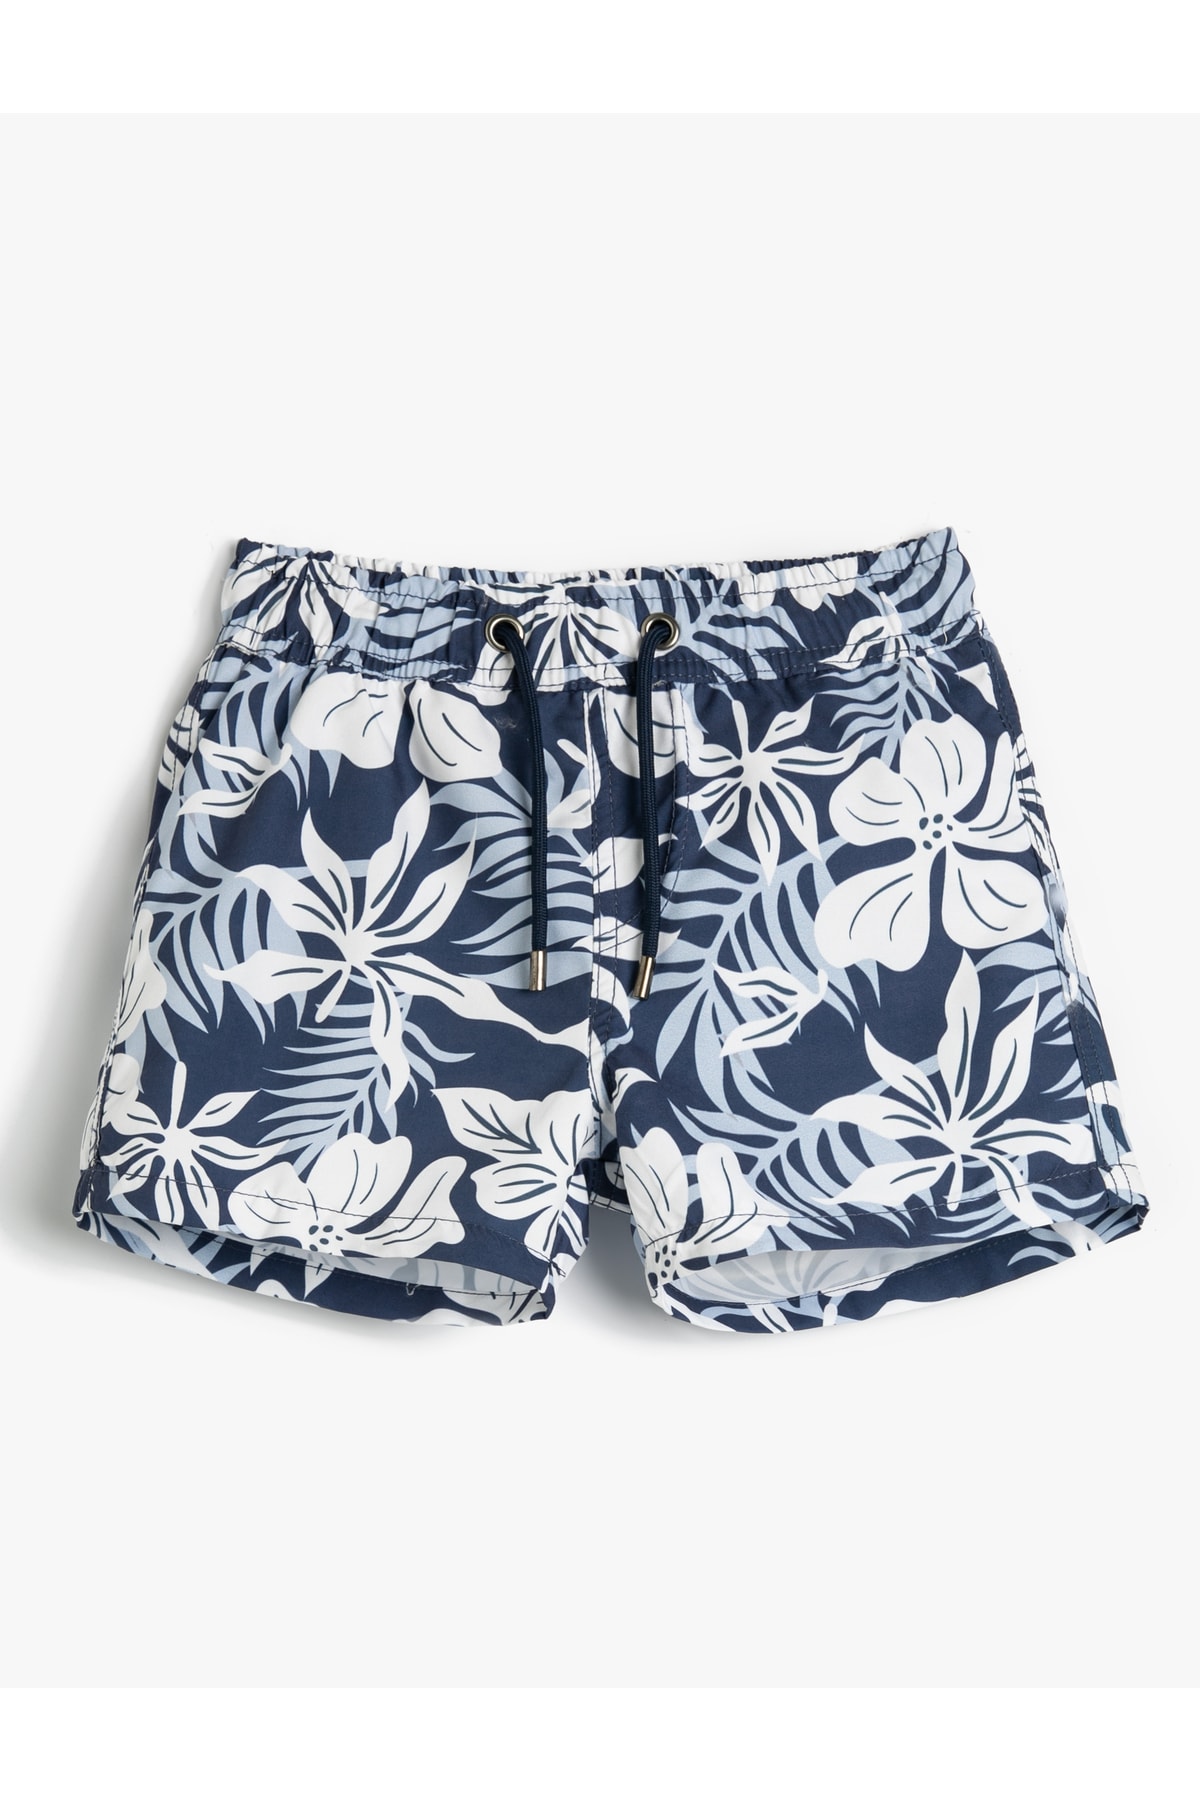 Levně Koton Marine Shorts with Tie Waist Floral Pattern, Mesh Lined.